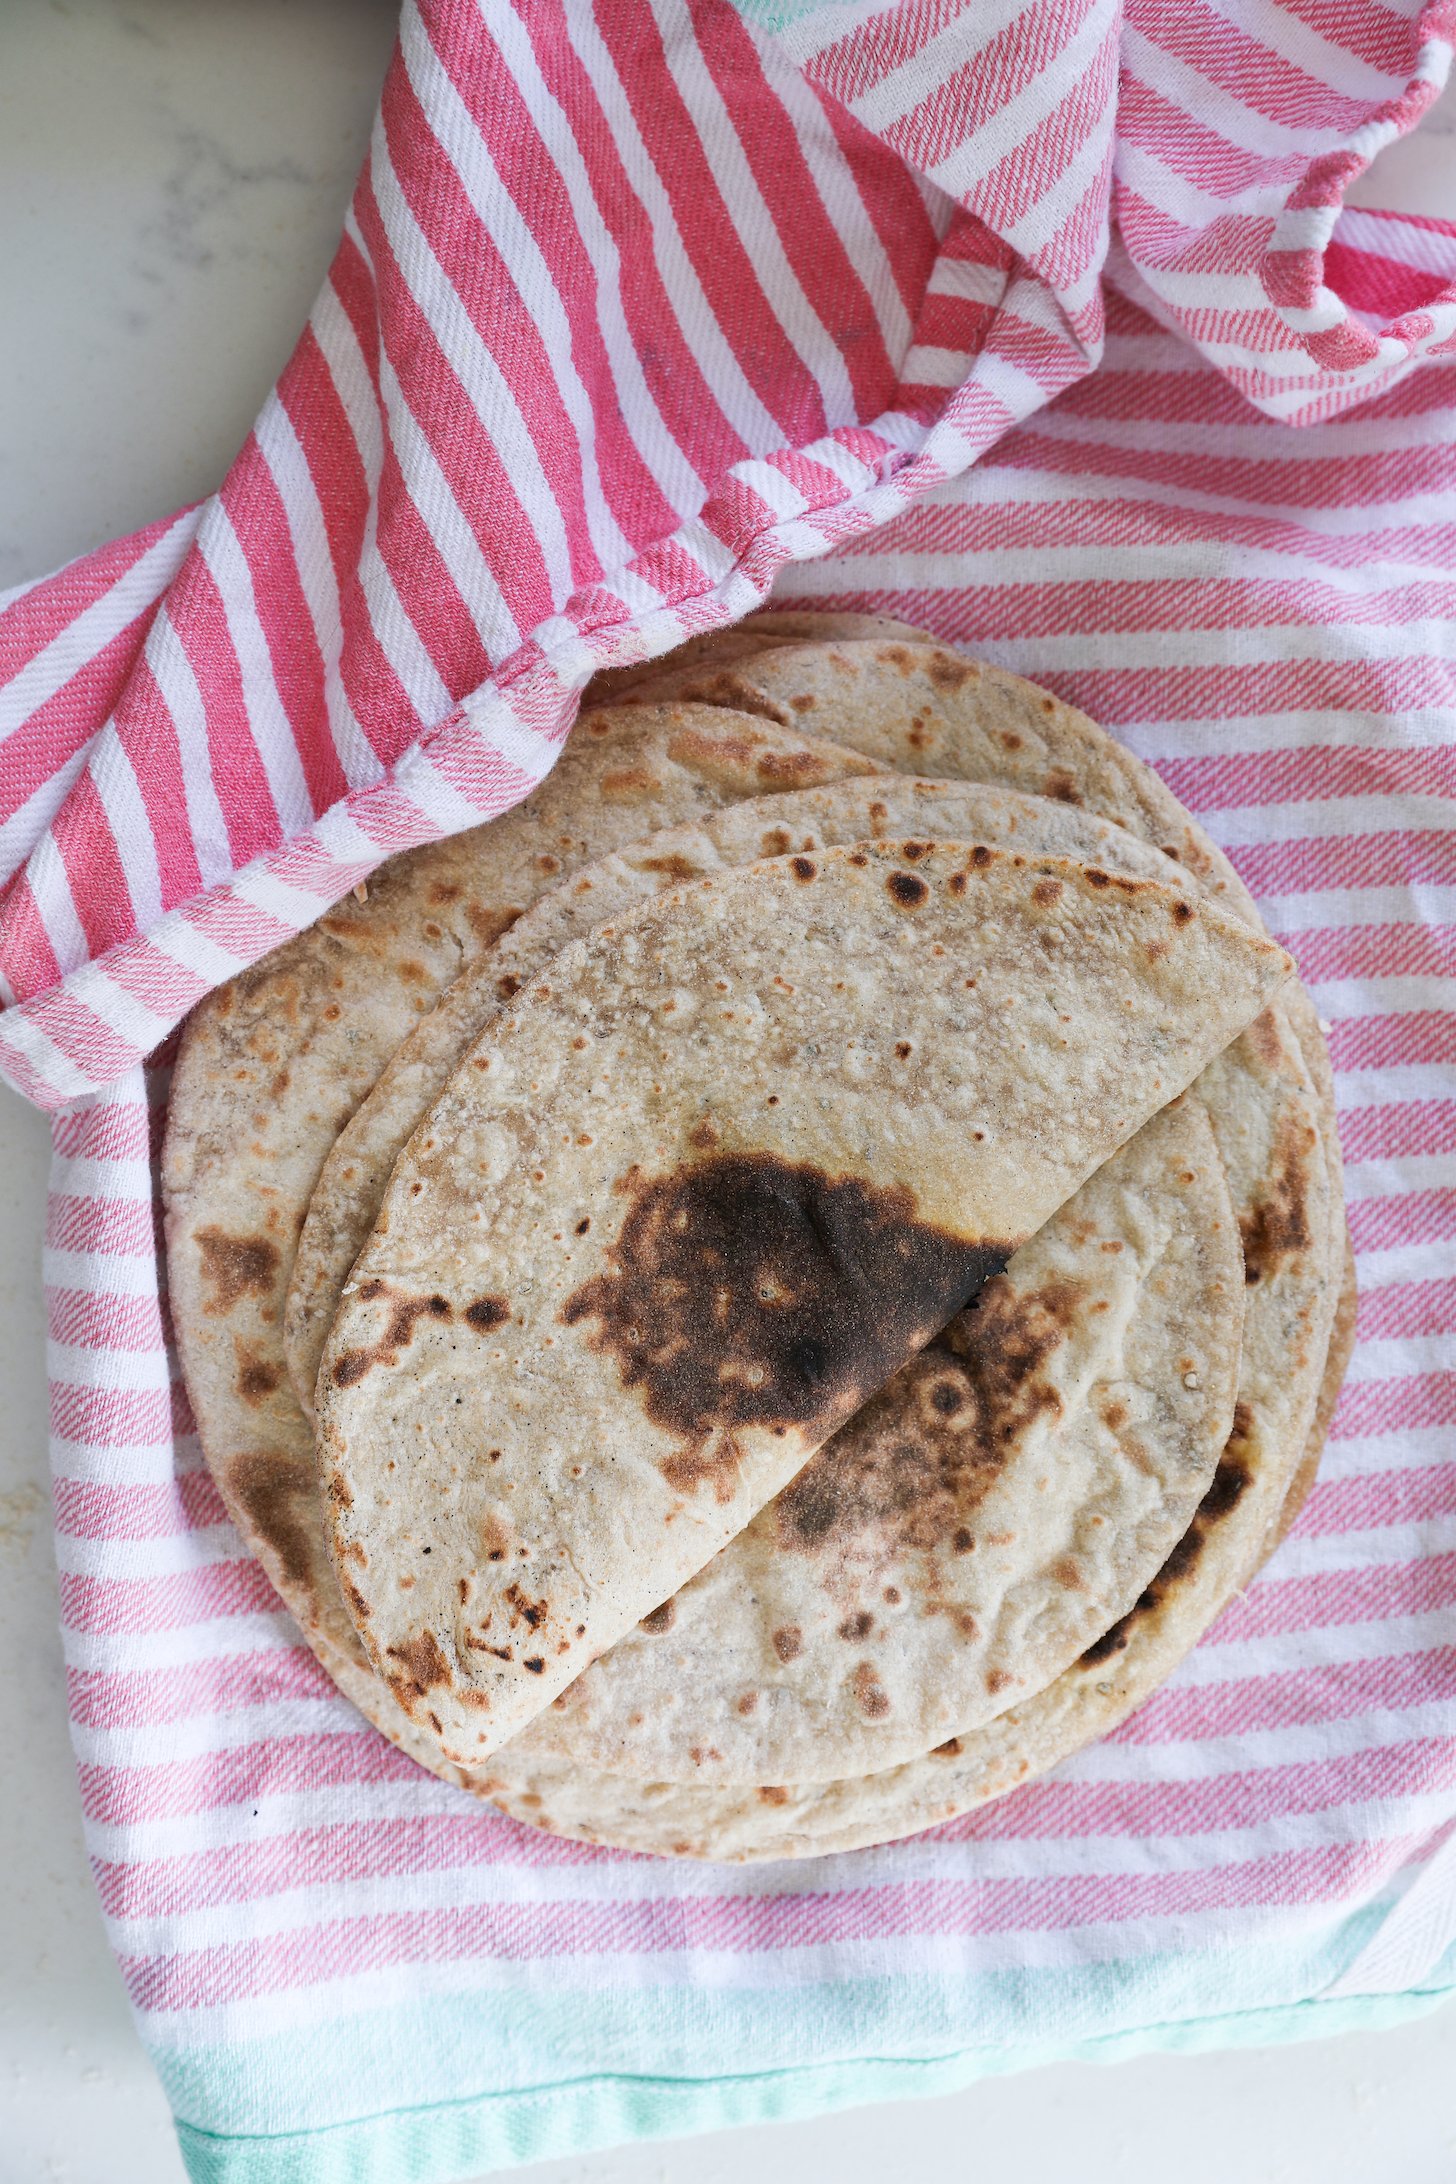 A stack of rotis on a pink striped kitchen towel.